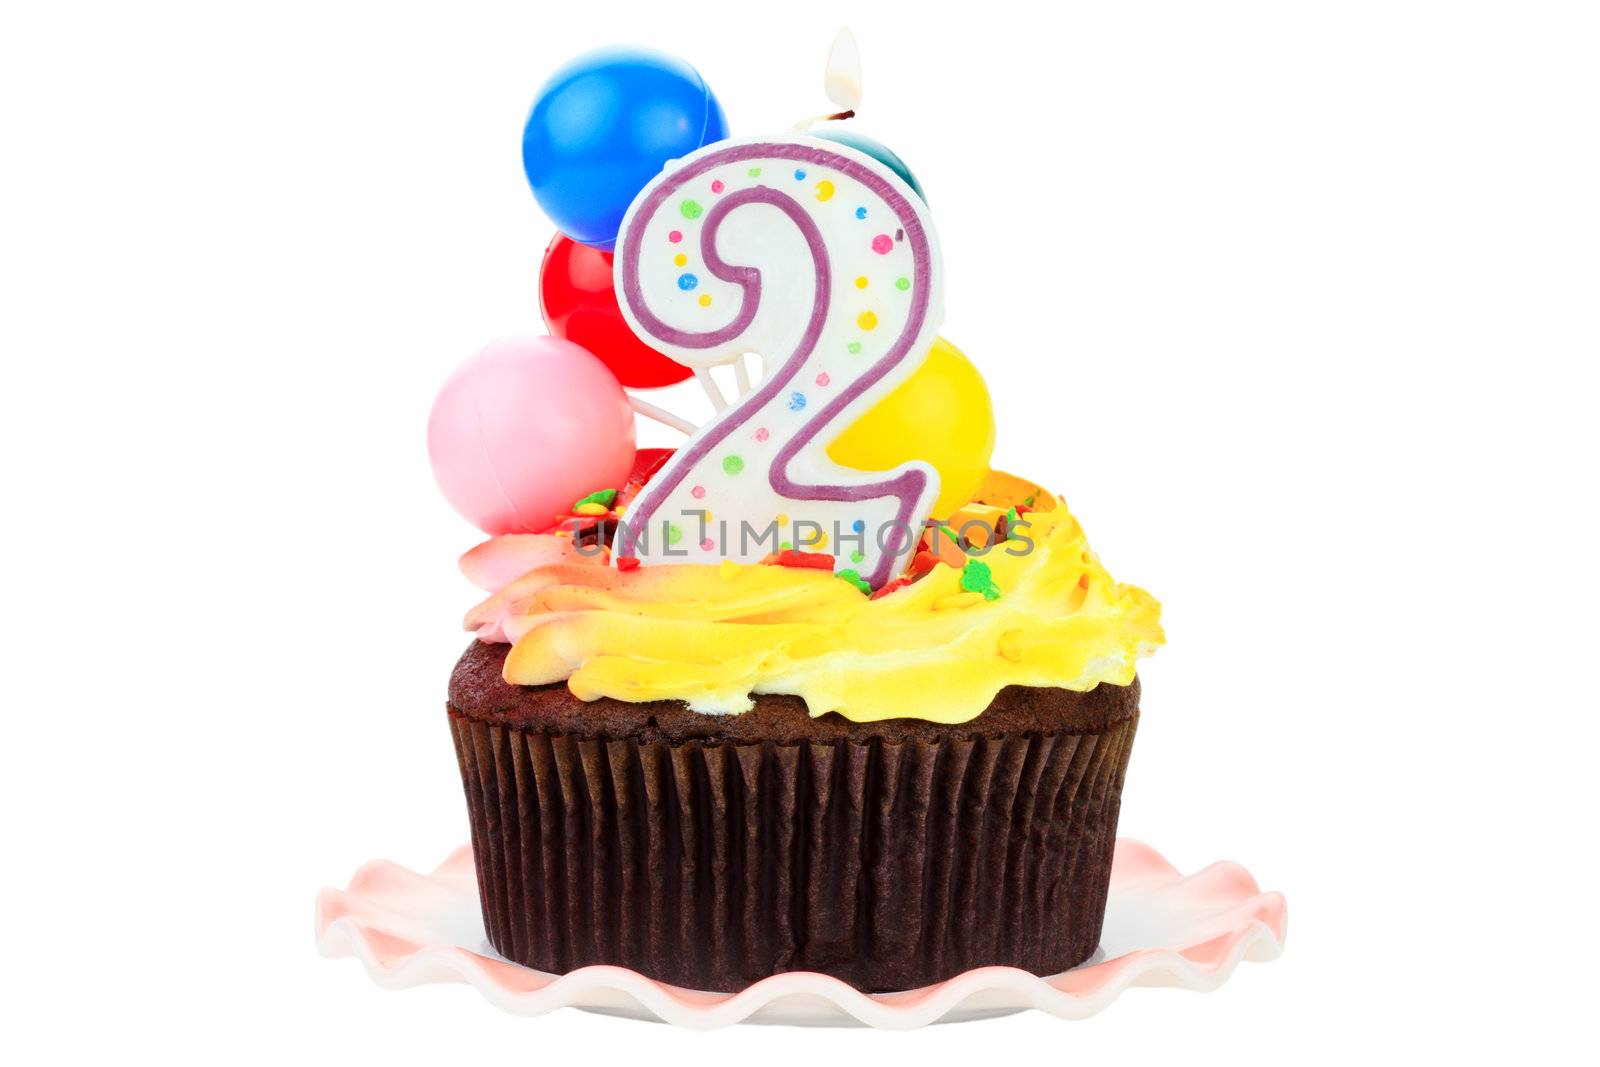 Chocolate birthday cake with number  two candle and plastic balloons. Isolated on a white background.